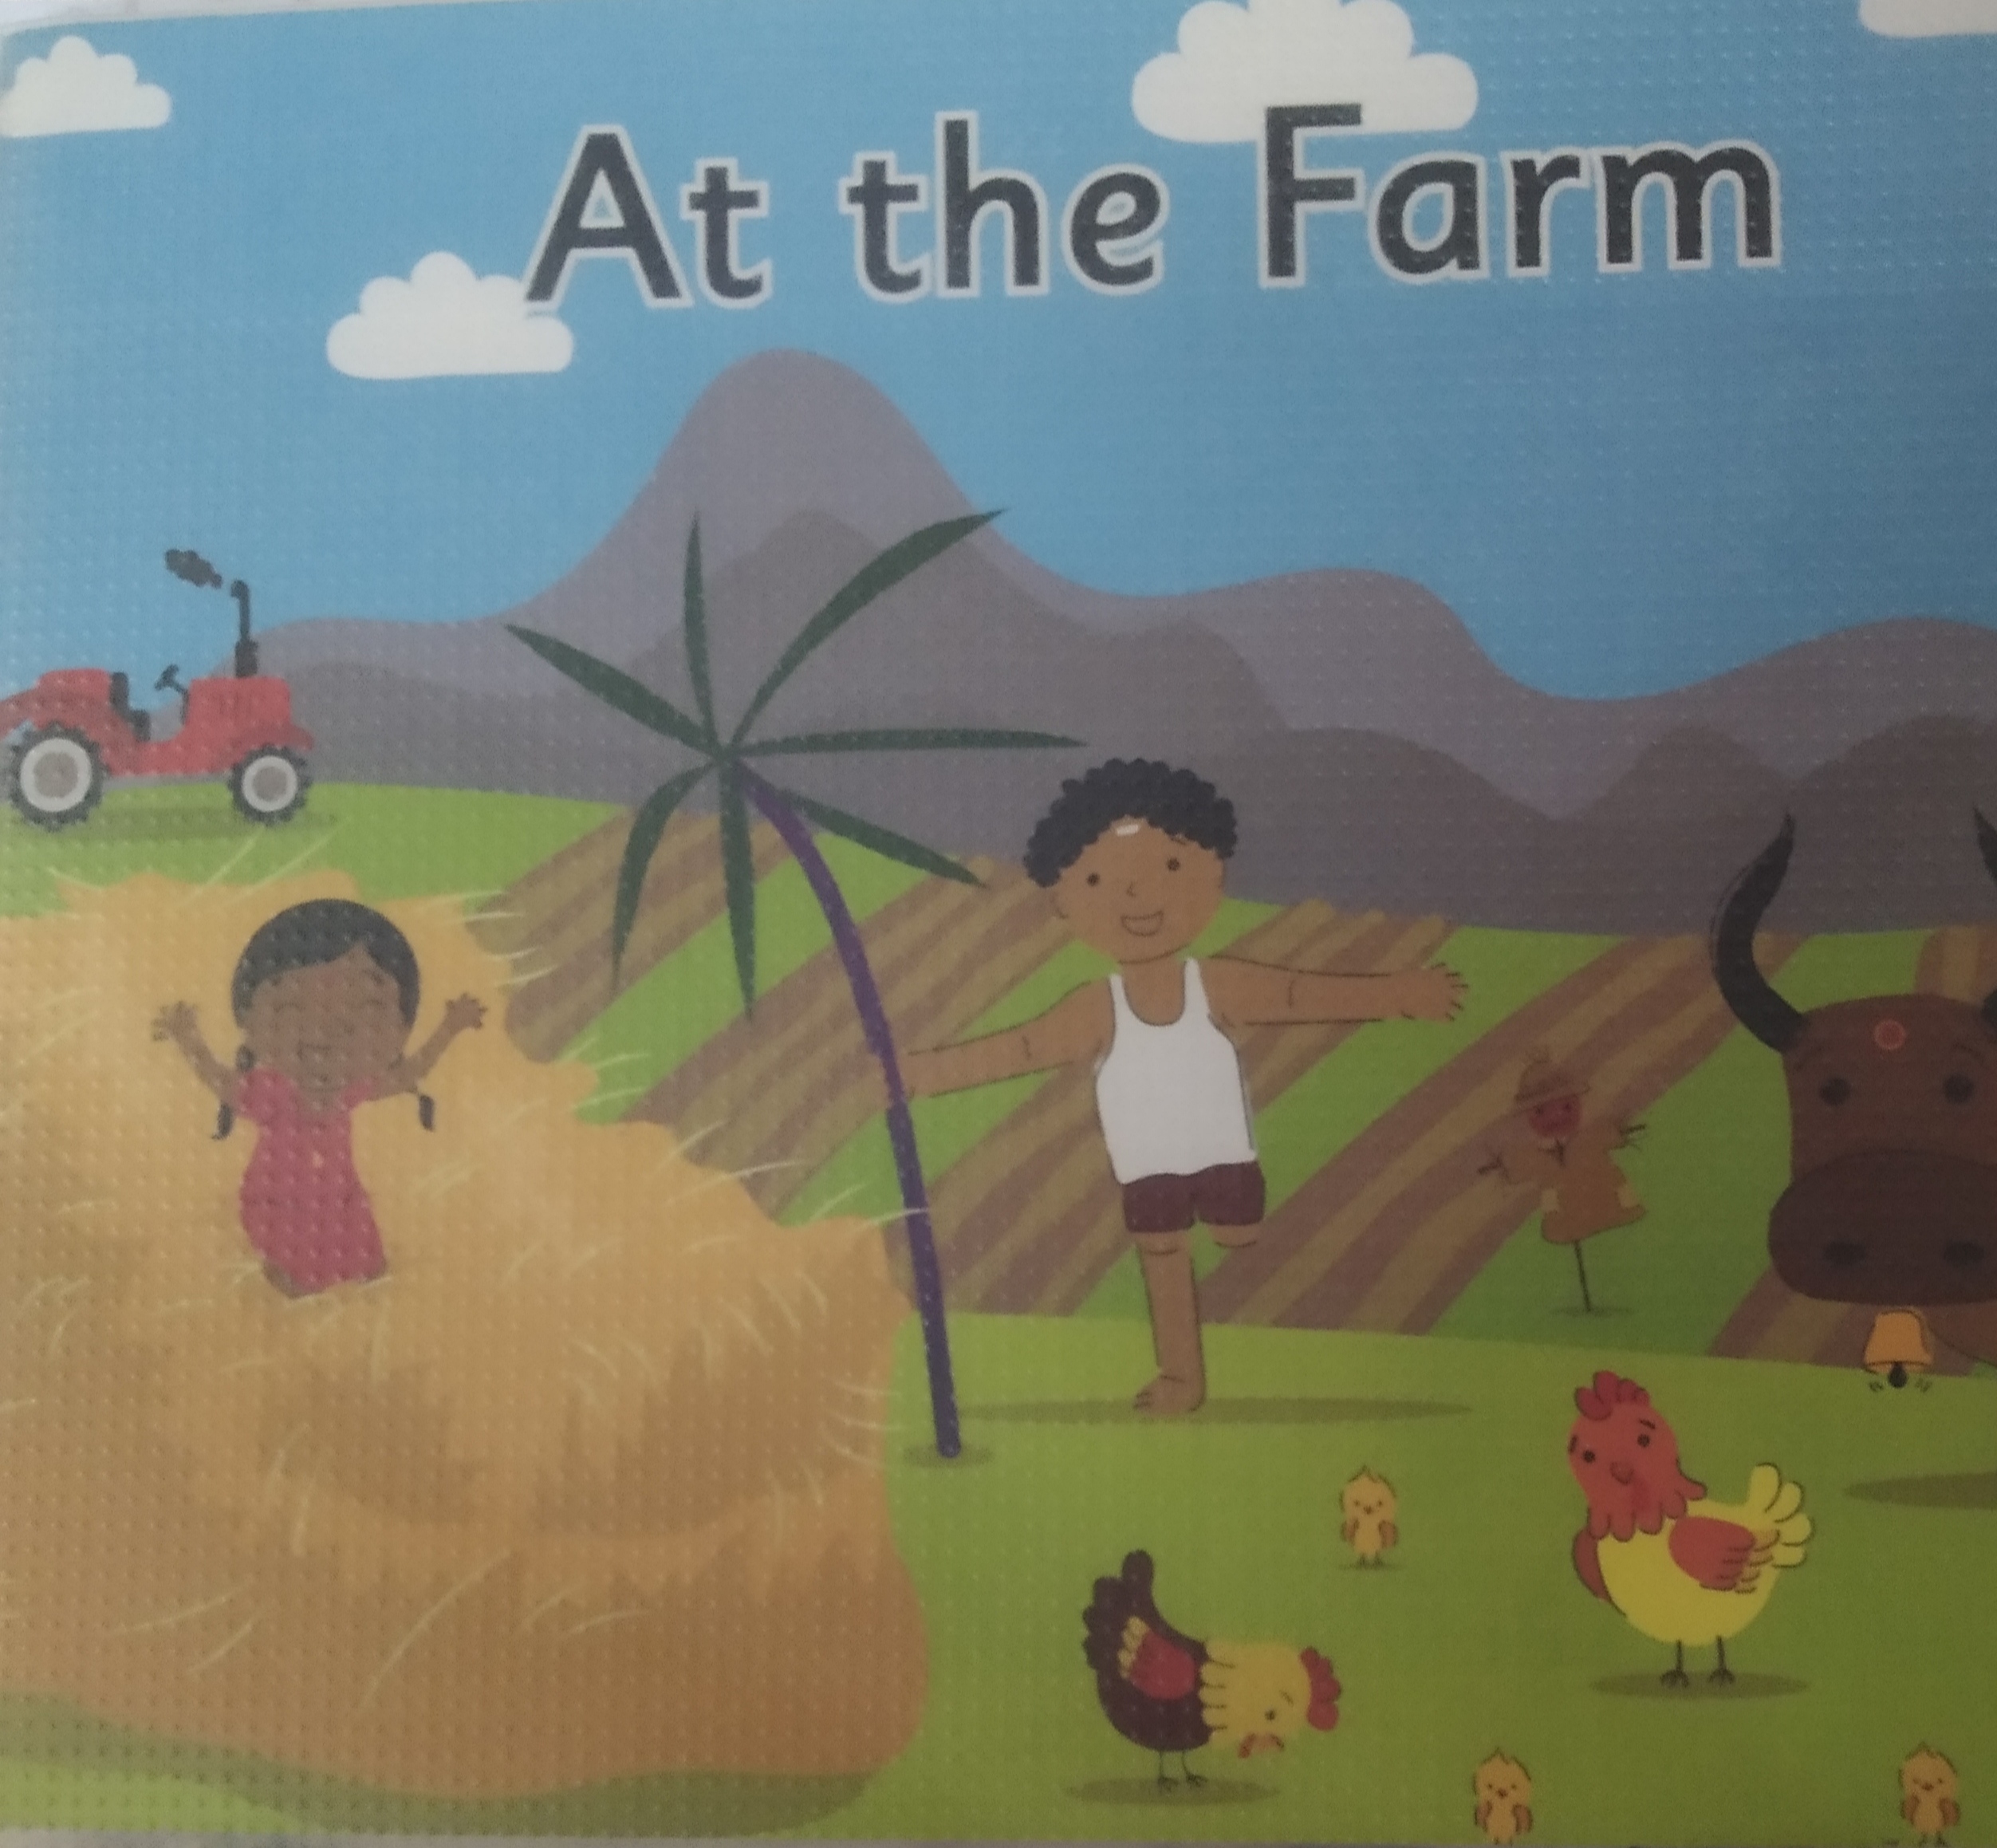 At the Farm book review by kids with Sara Bookosmia